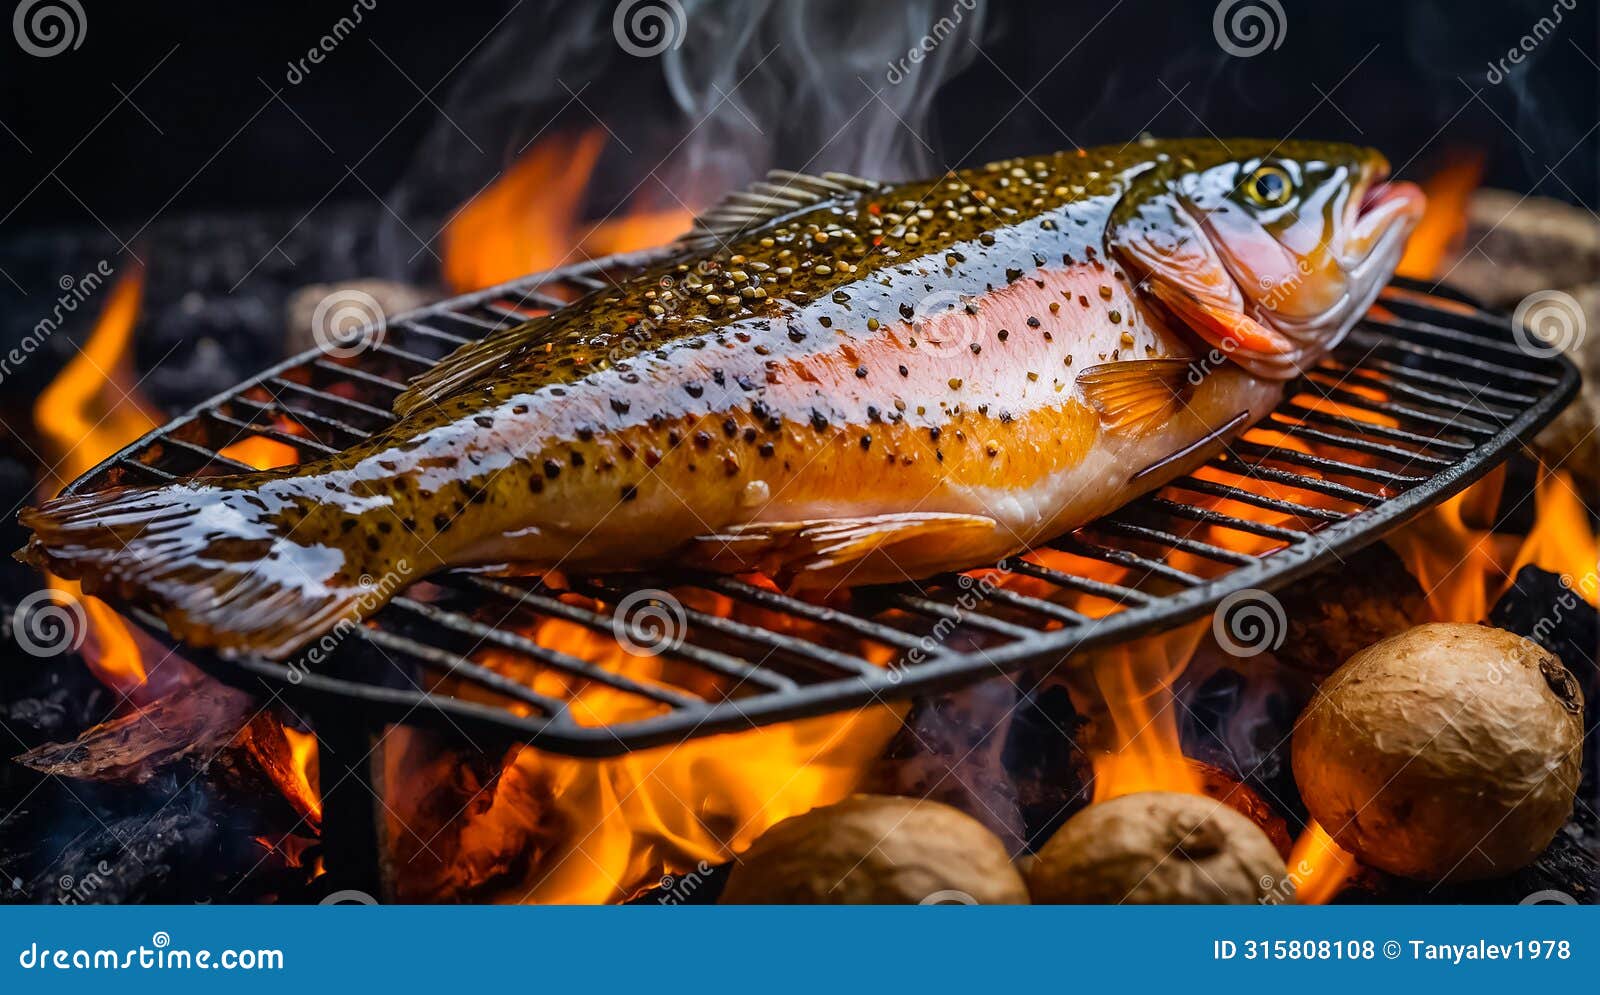 whole fish fried a grill natural tasty nourishment